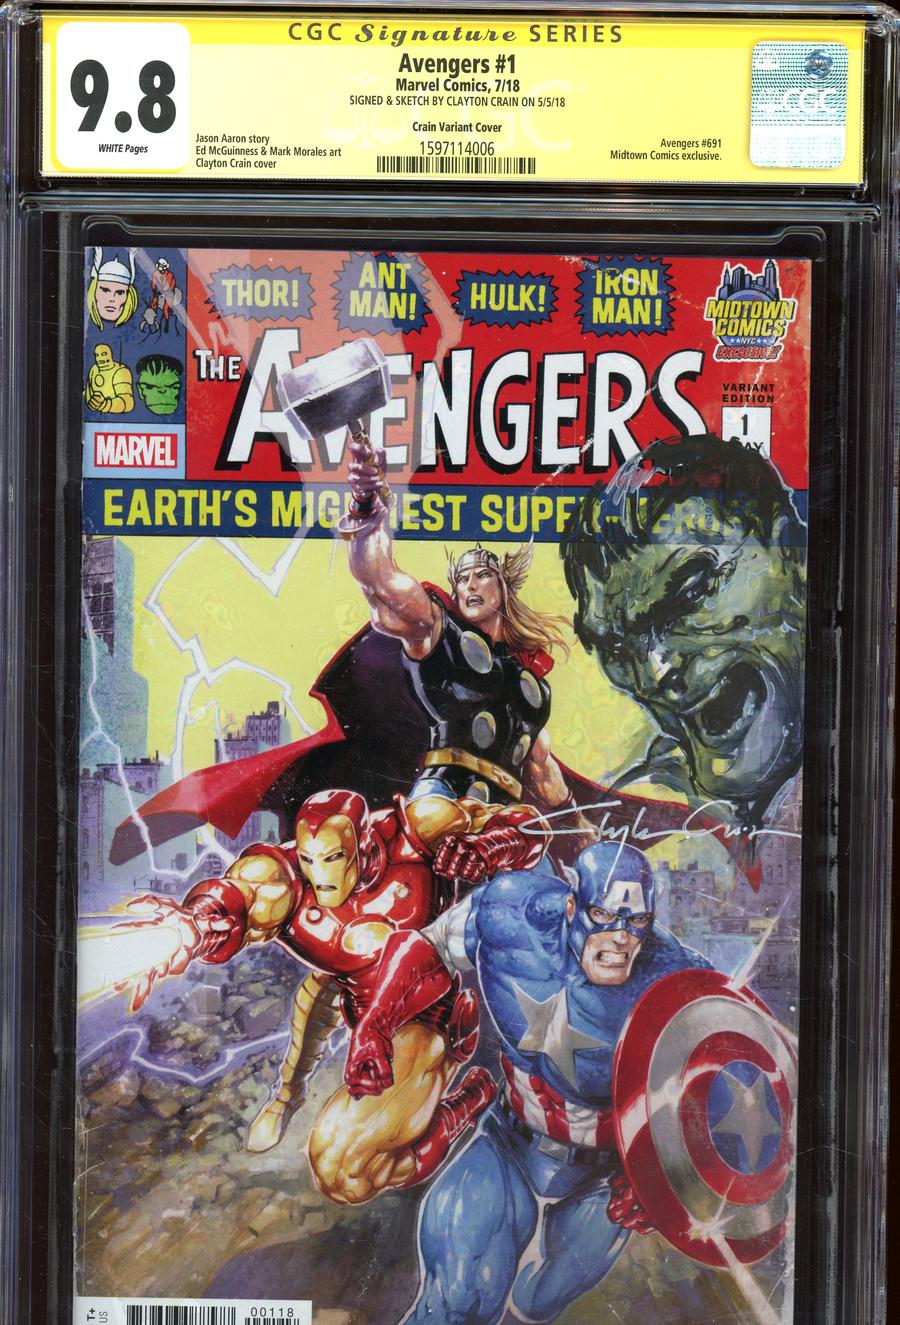 Avengers Vol 7 #1  Midtown Exclusive Clayton Crain Variant Cover Signed And Hulk Sketch By Clayton Crain CGC 9.8